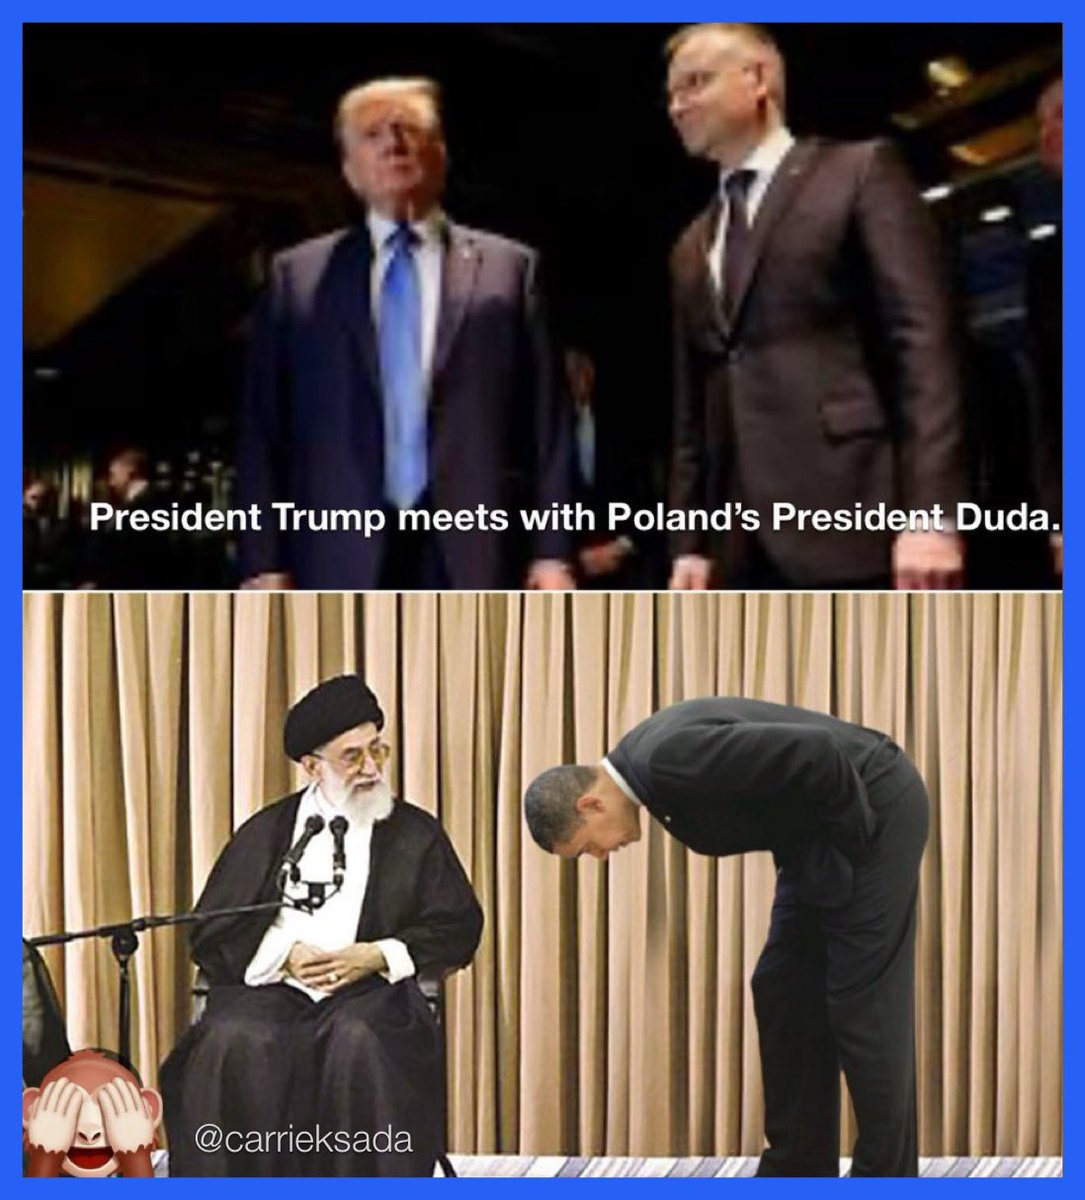 I know I would rather have a President who meets world leaders face to face, instead of one who bows to our enemies.